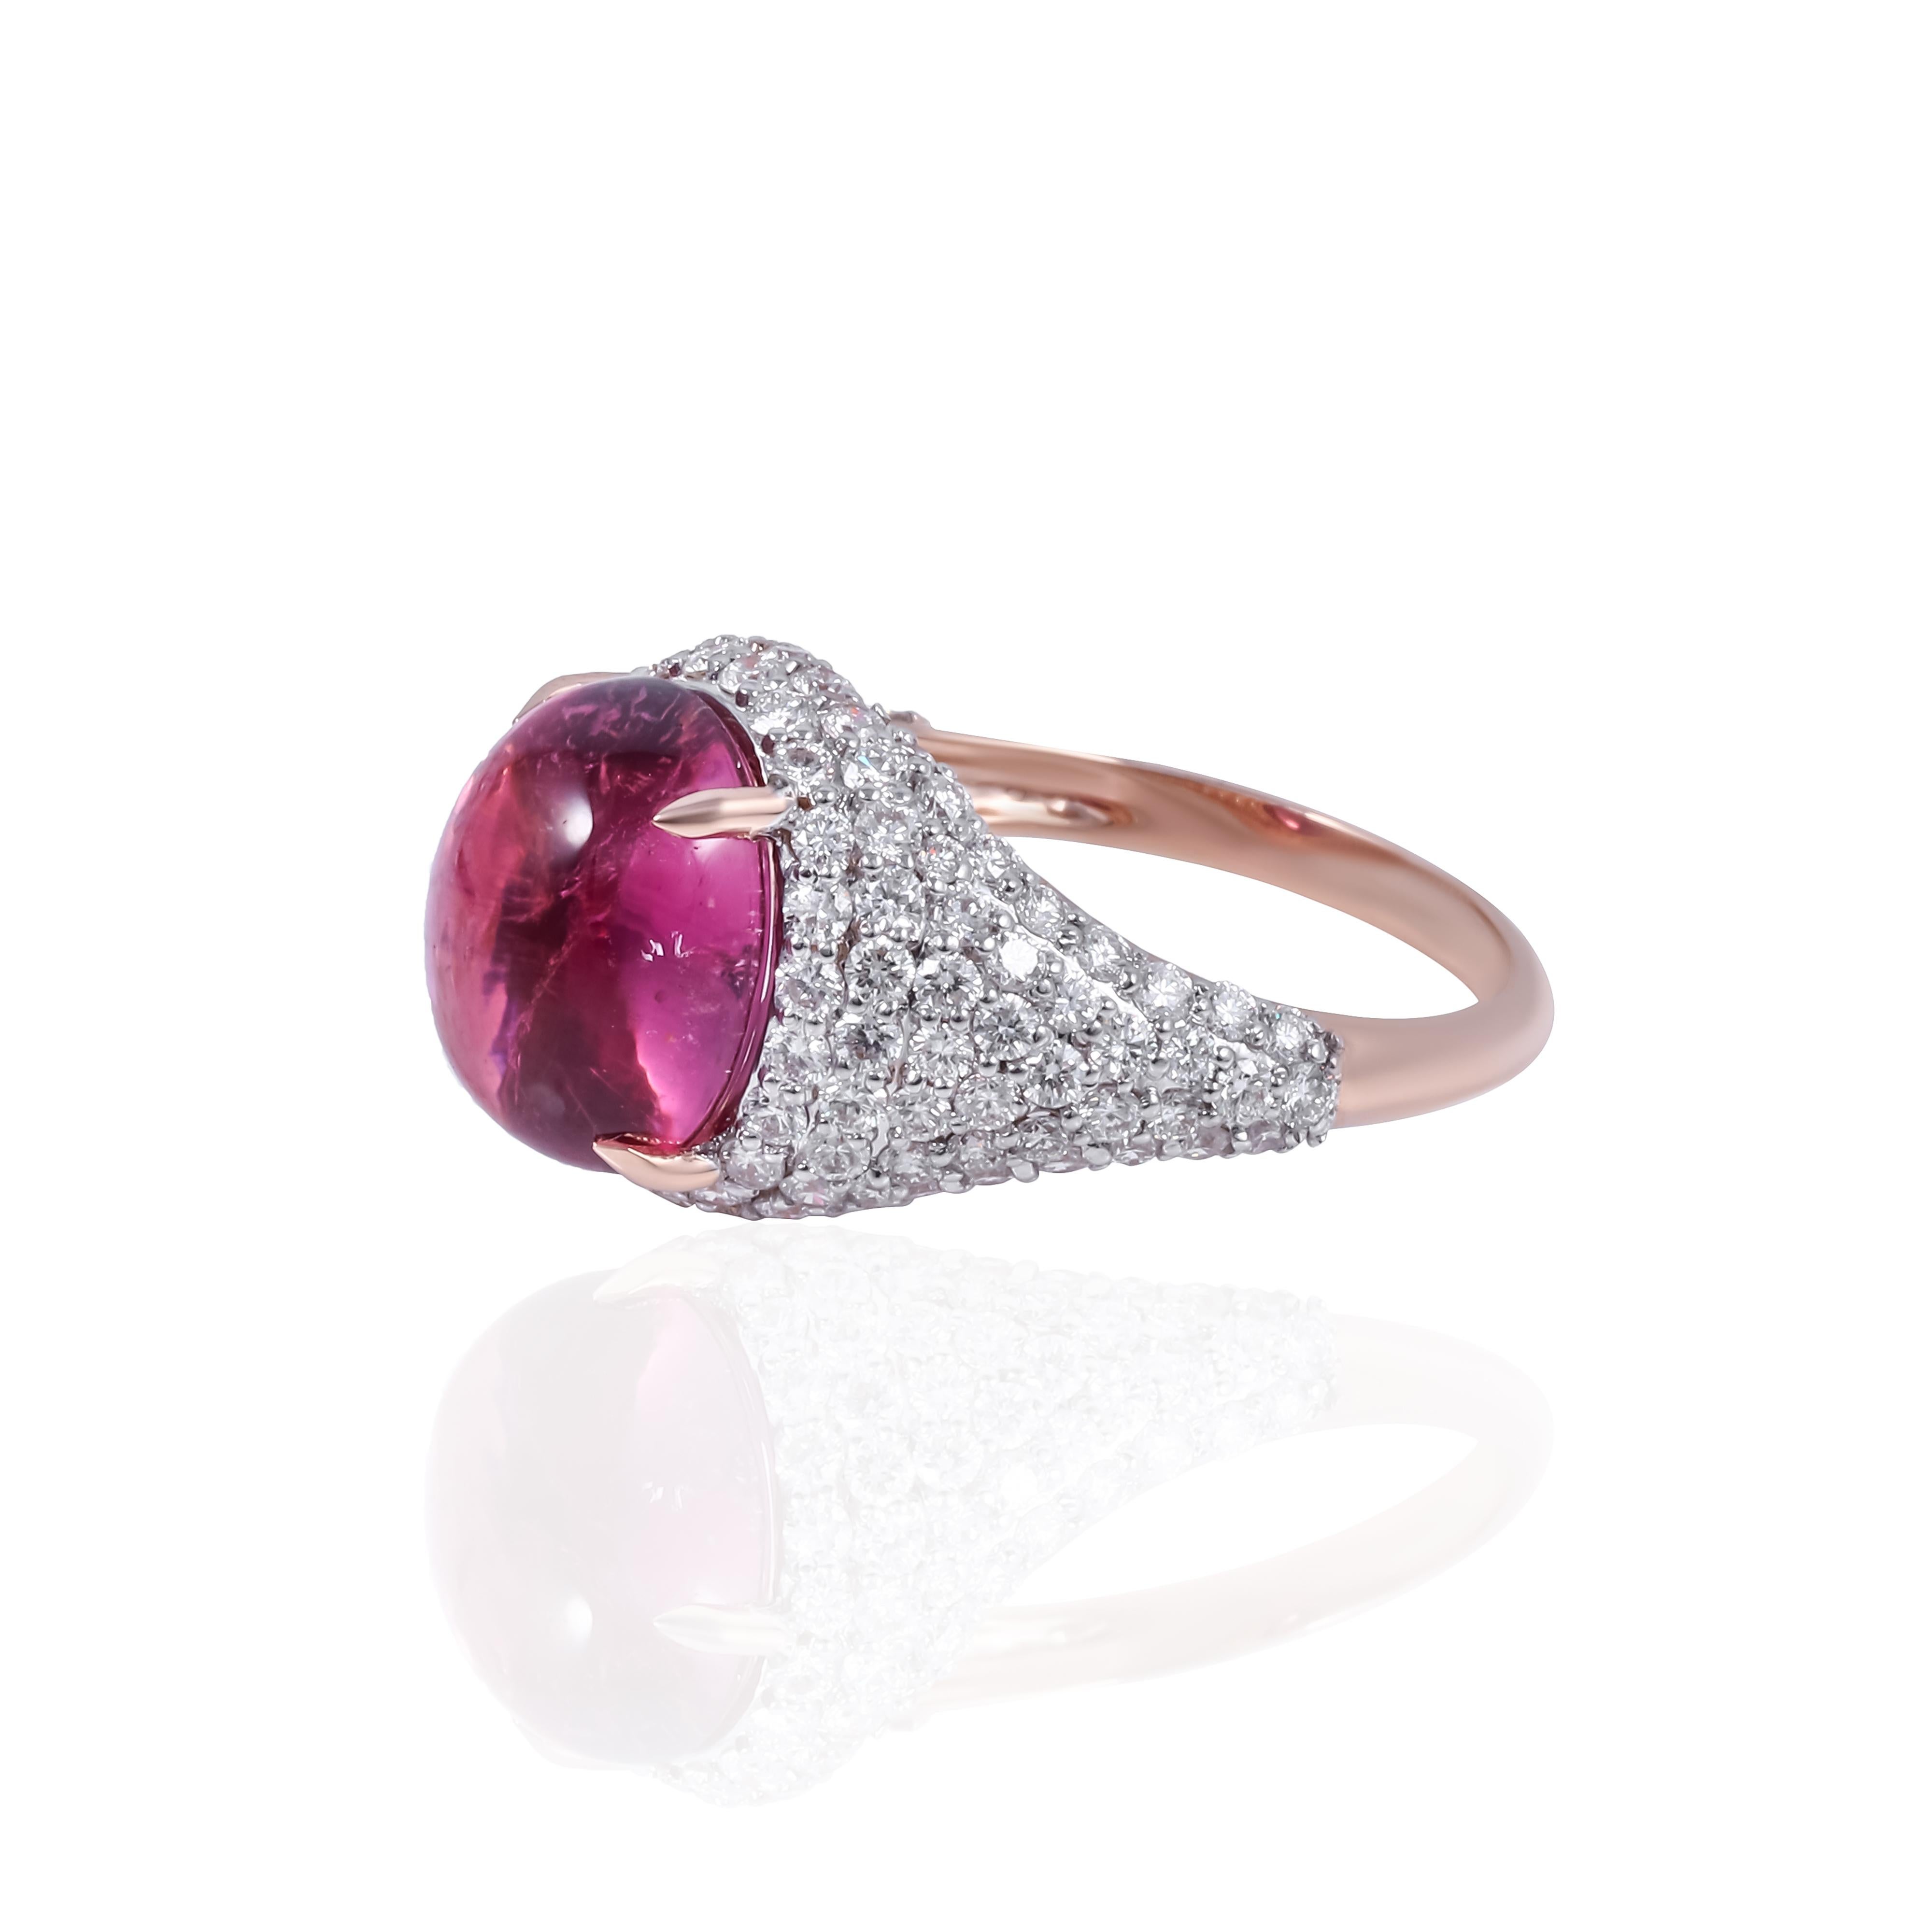 Art Deco Pink Tourmaline Ring 6.55 Carat with Diamonds on the side band For Sale